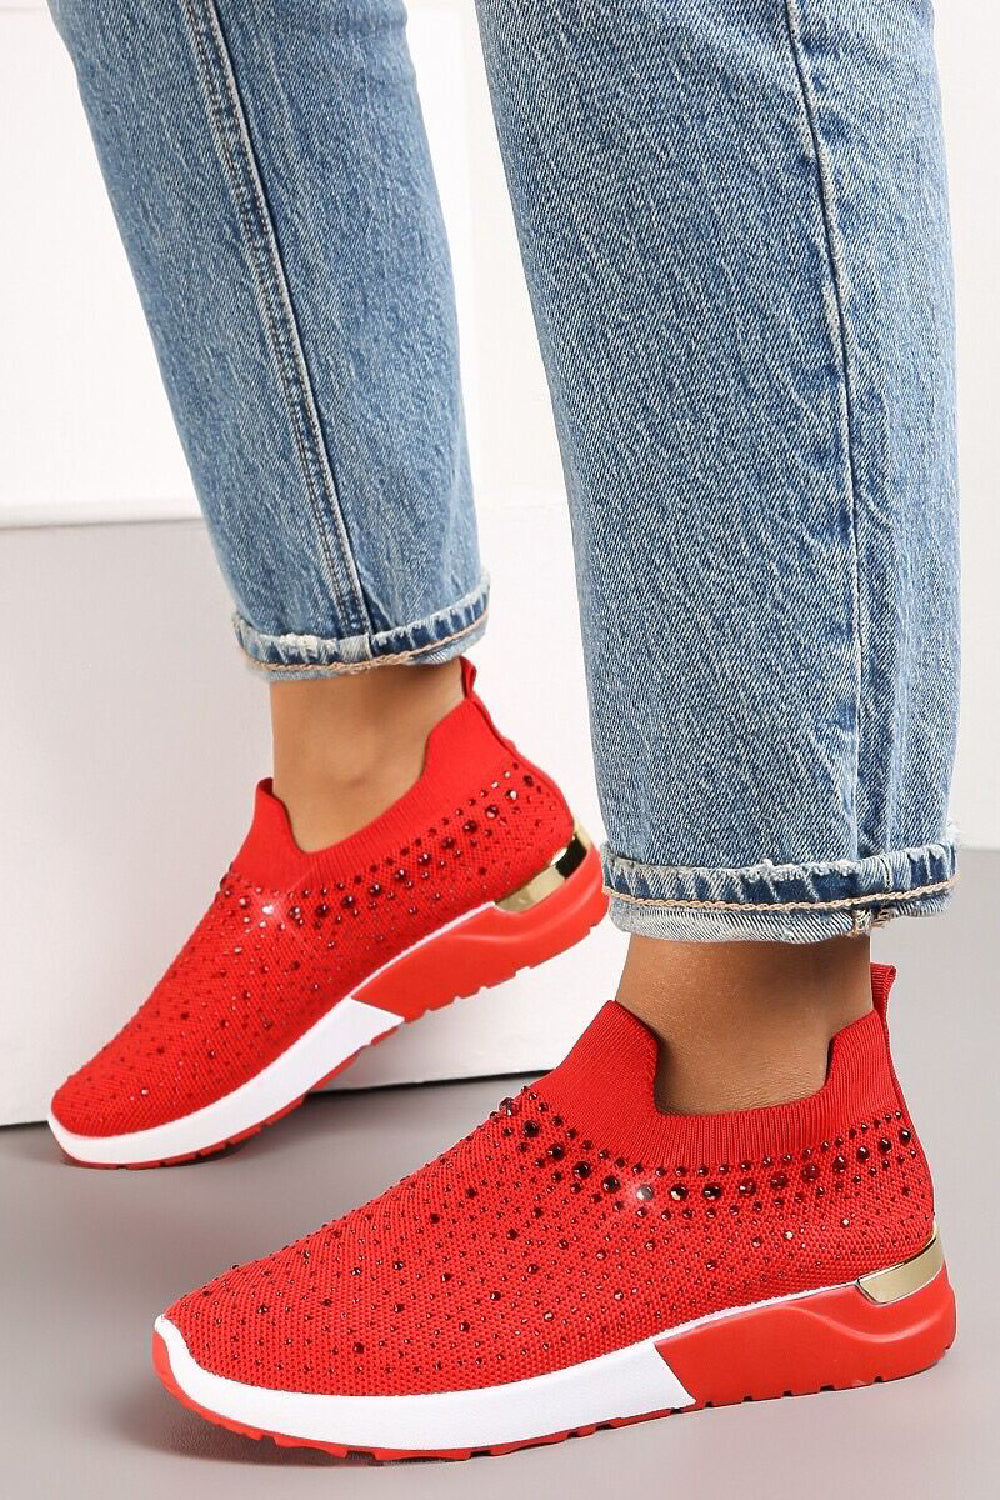 RED DIAMANTE DETAIL SLIP ON TRAINERS SHOES